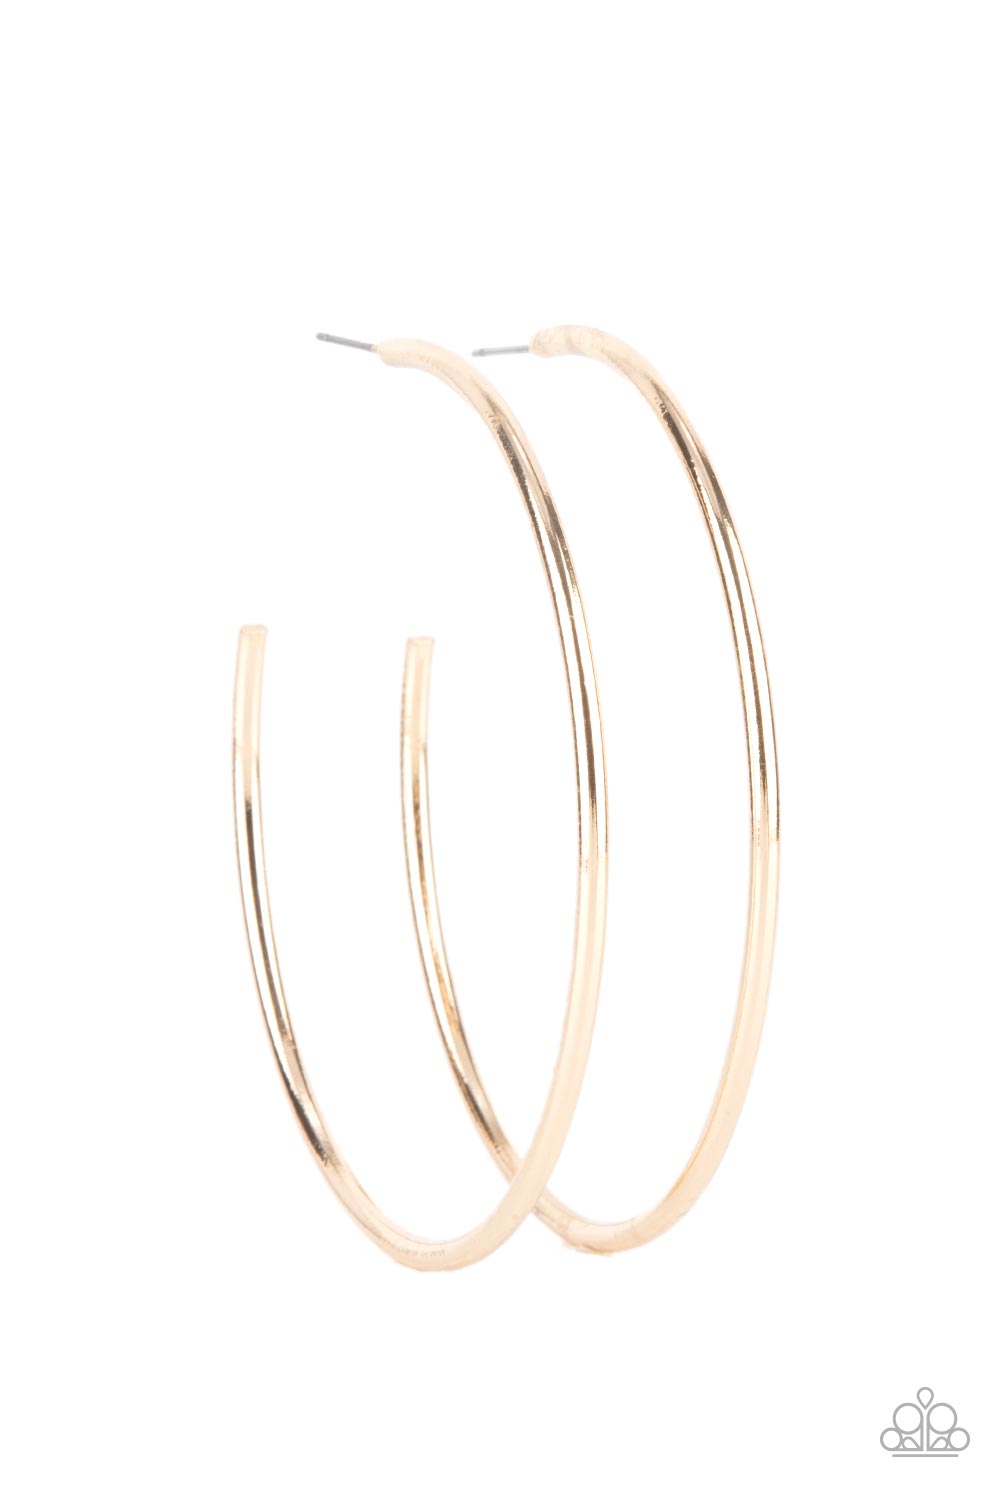 MEGA METRO - GOLD - Paparazzi - Featuring a high sheen, a polished gold hoop stands out in a mega way creating a trendy display as it wraps around the ear. Earring attaches to a standard post fitting. Hoop measures approximately 3